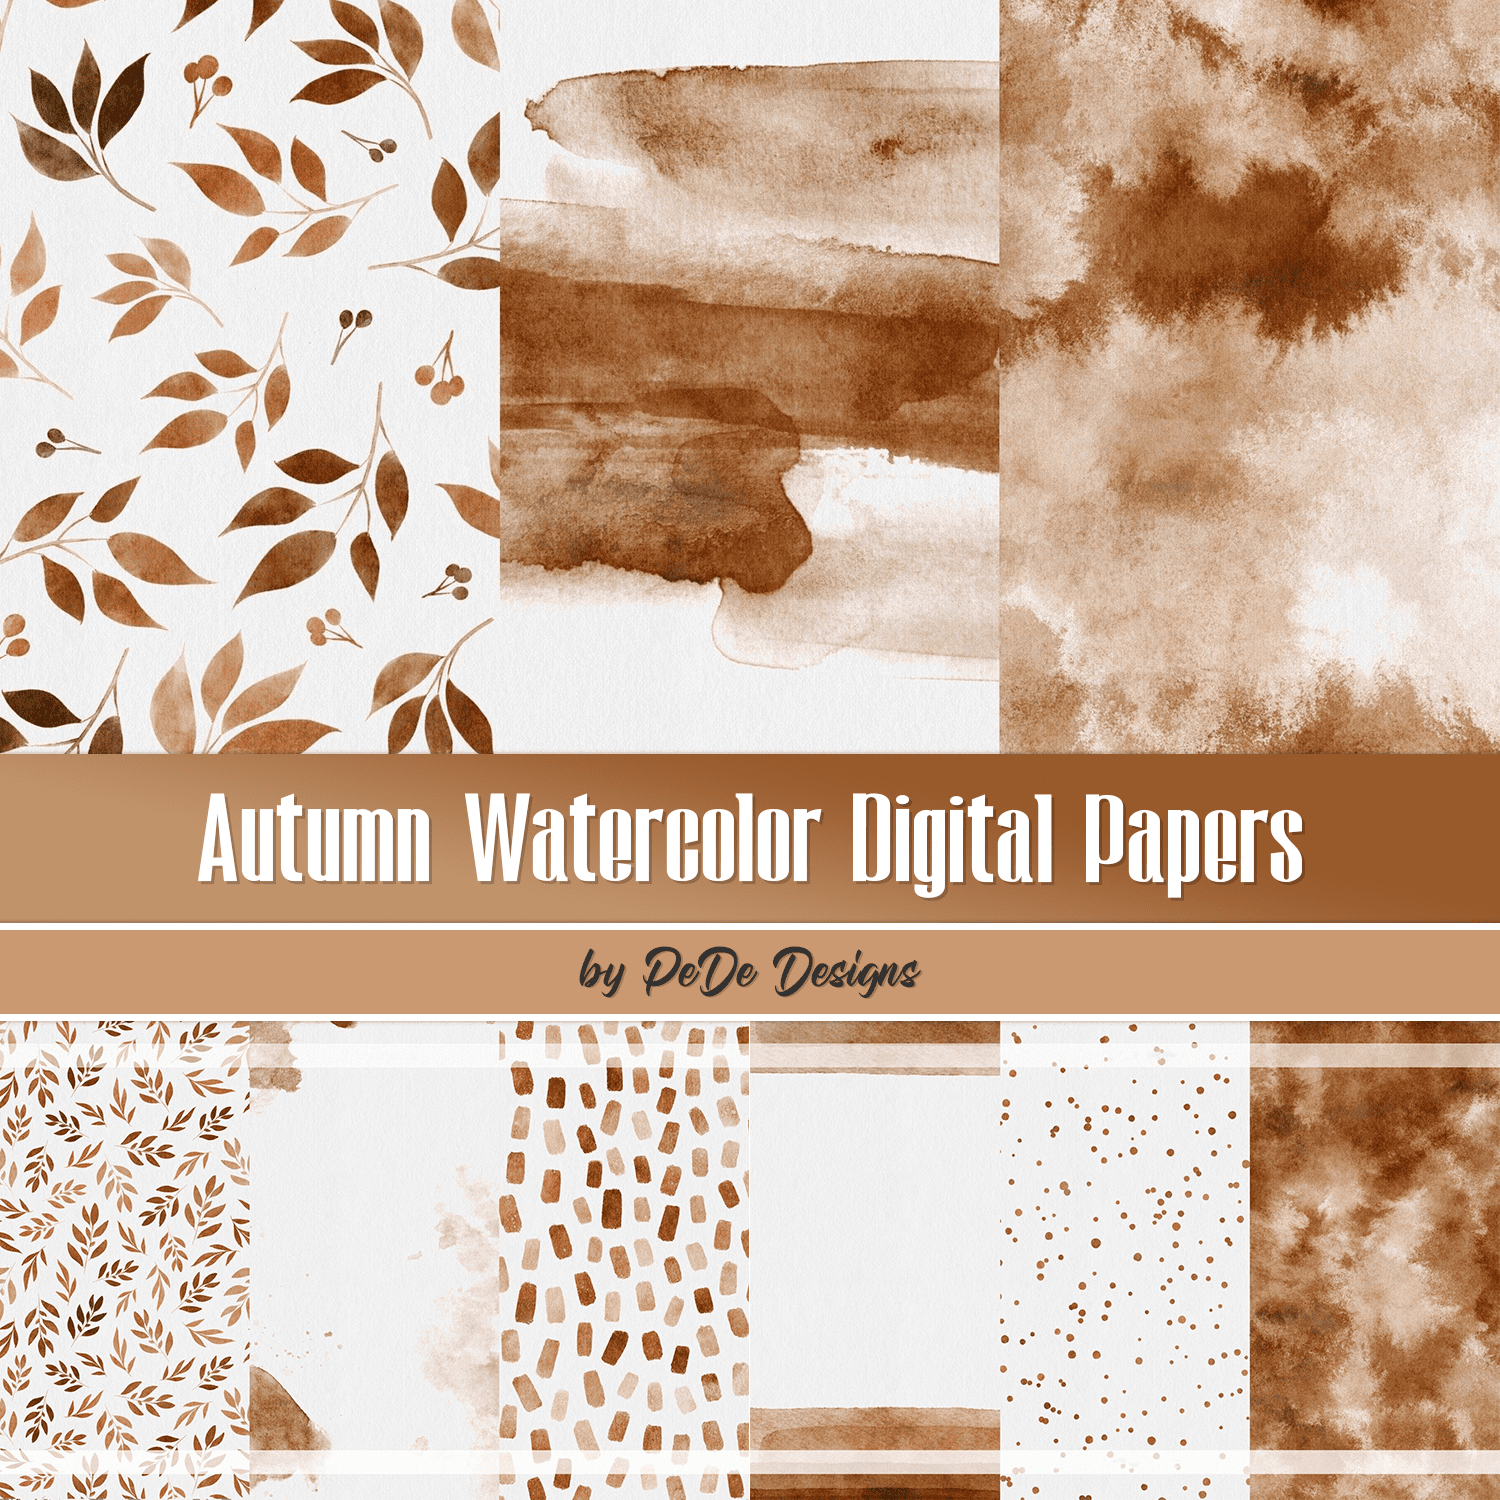 Autumn Watercolor Digital Papers cover.